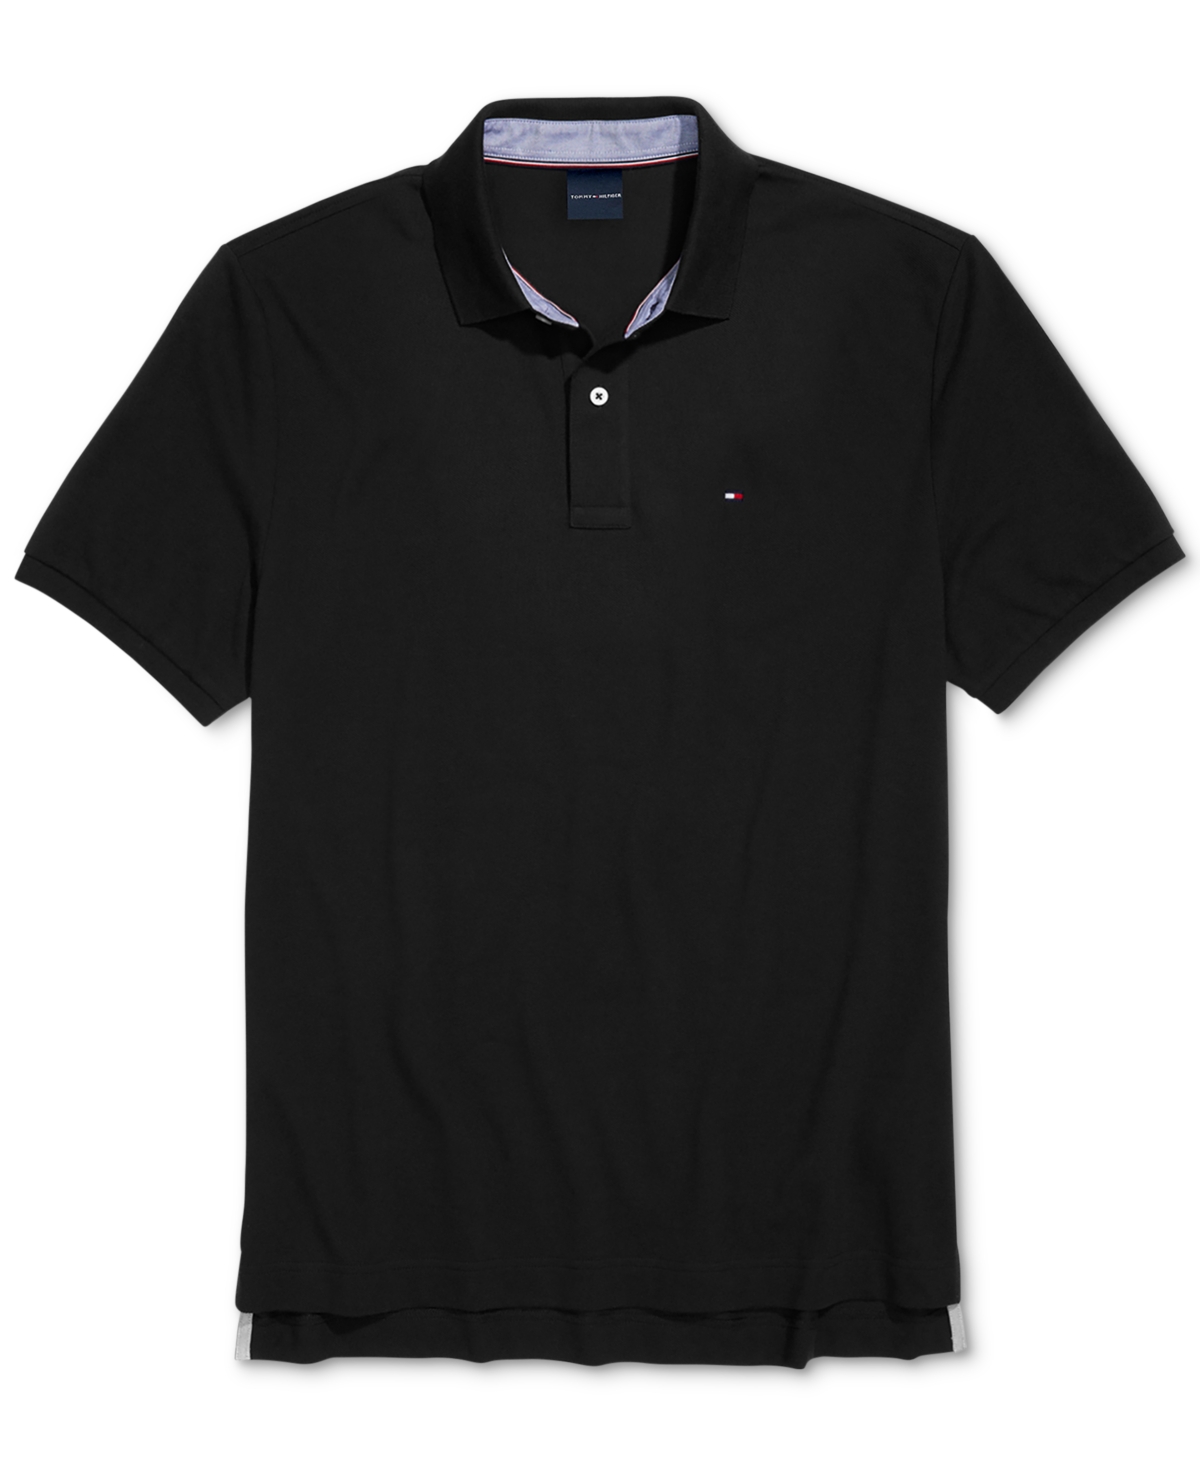 Tommy Hilfiger Adaptive Men's Classic-Fit Ivy Polo Shirt with Magnetic Closure